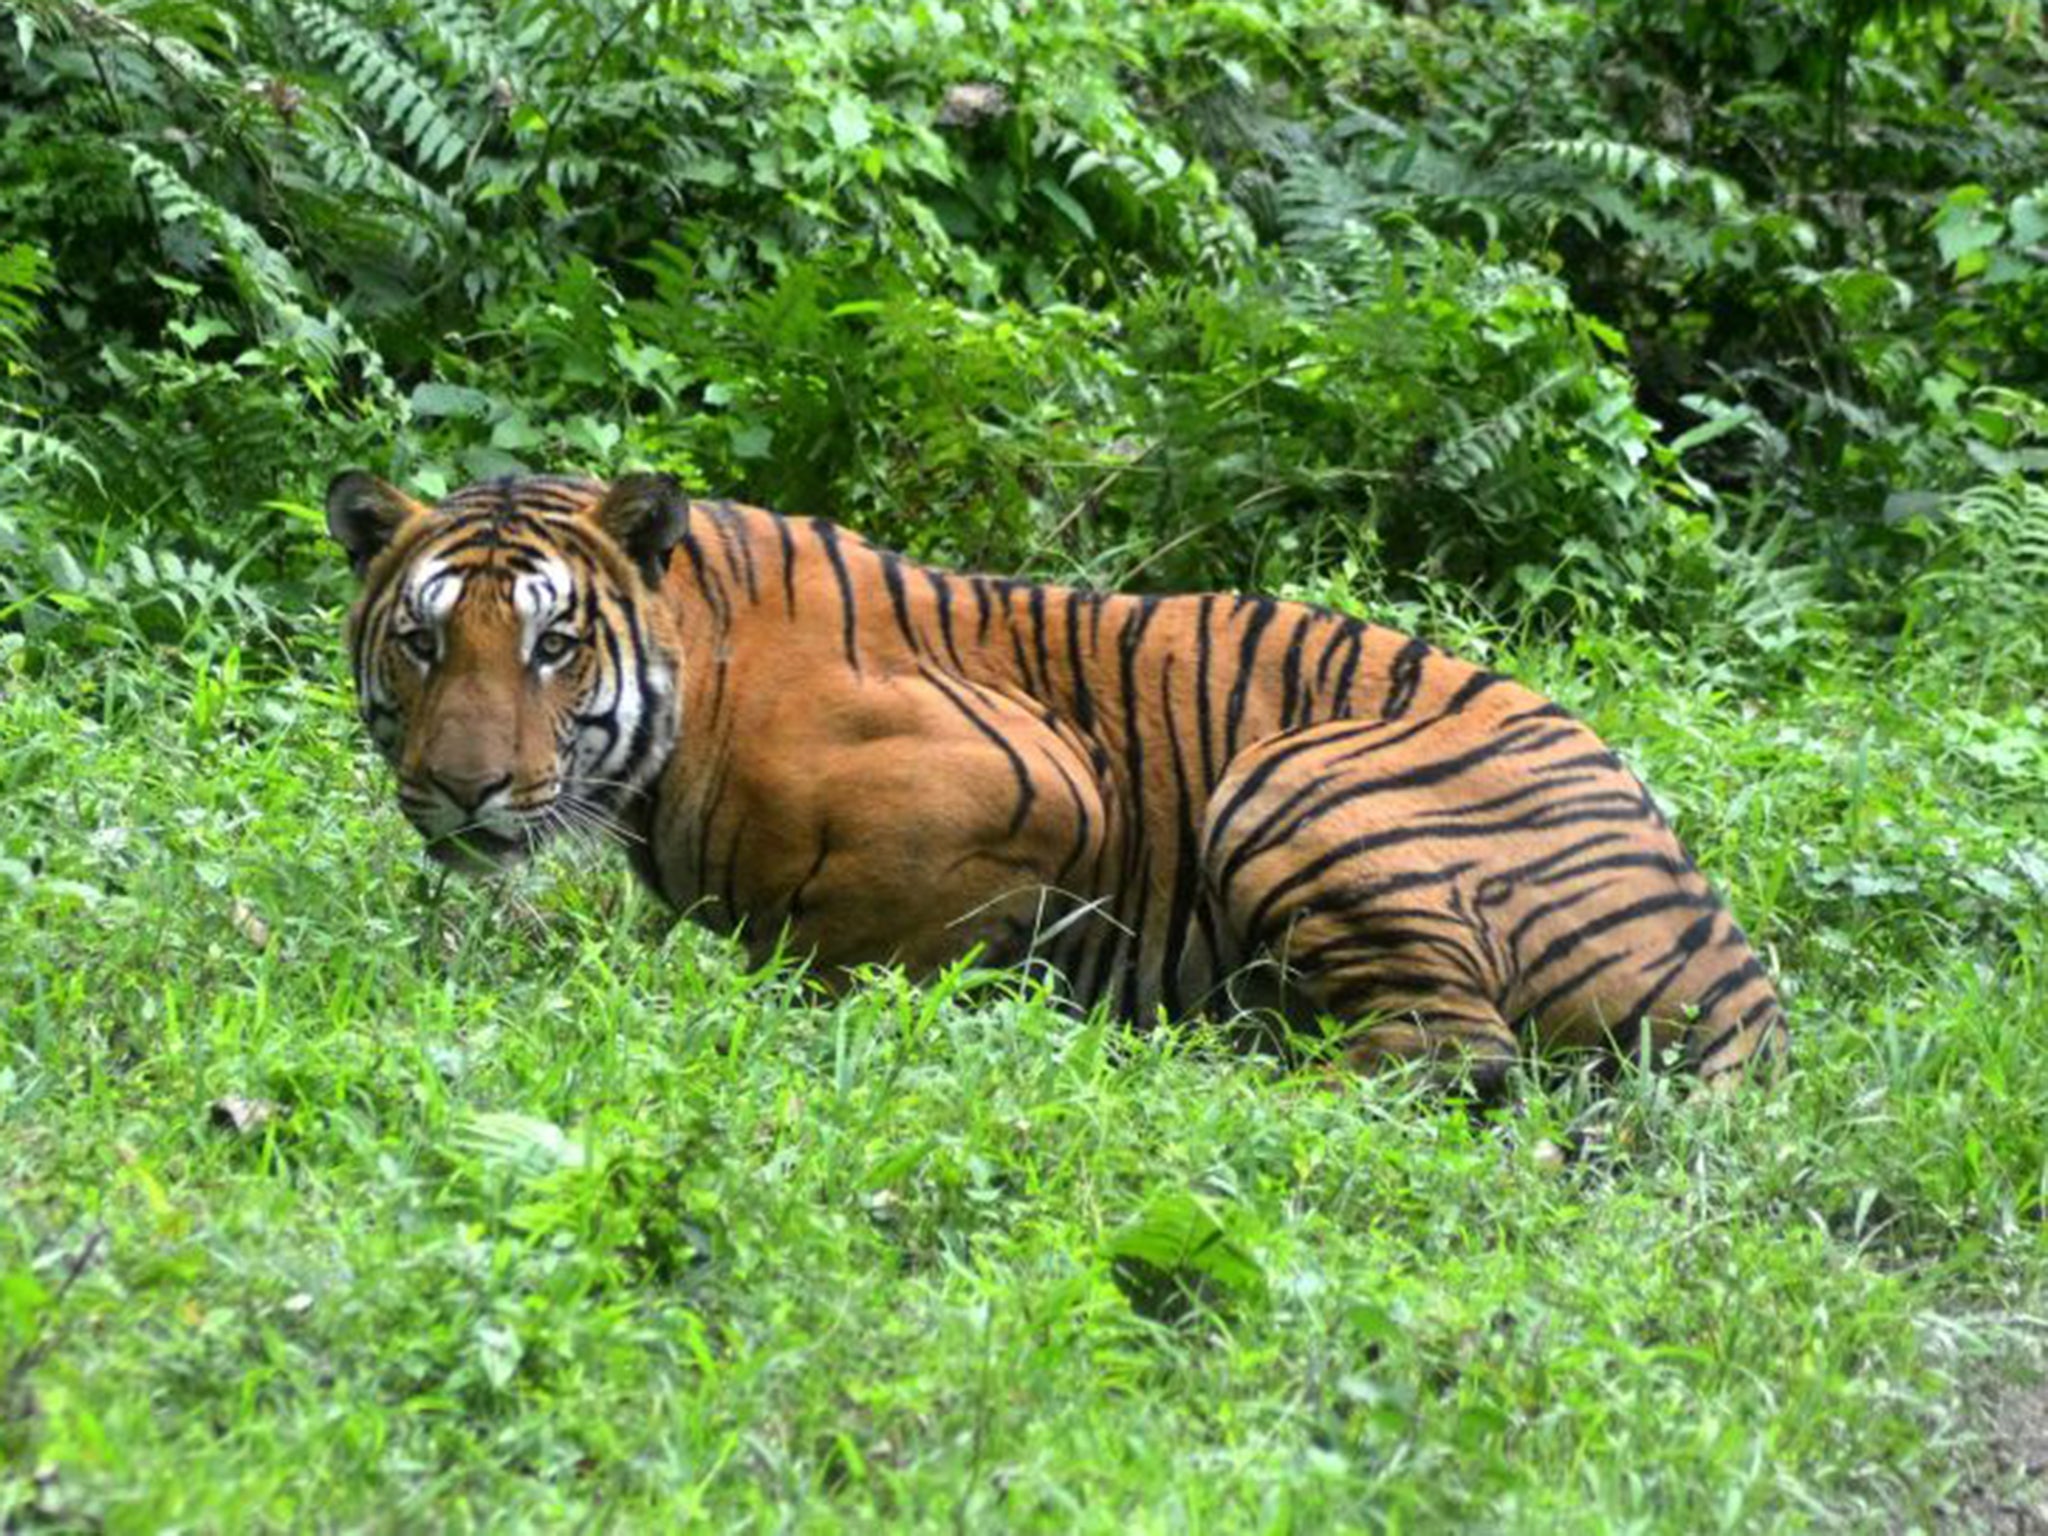 Data had shown that India’s tiger population had grown 30 per cent since 2010